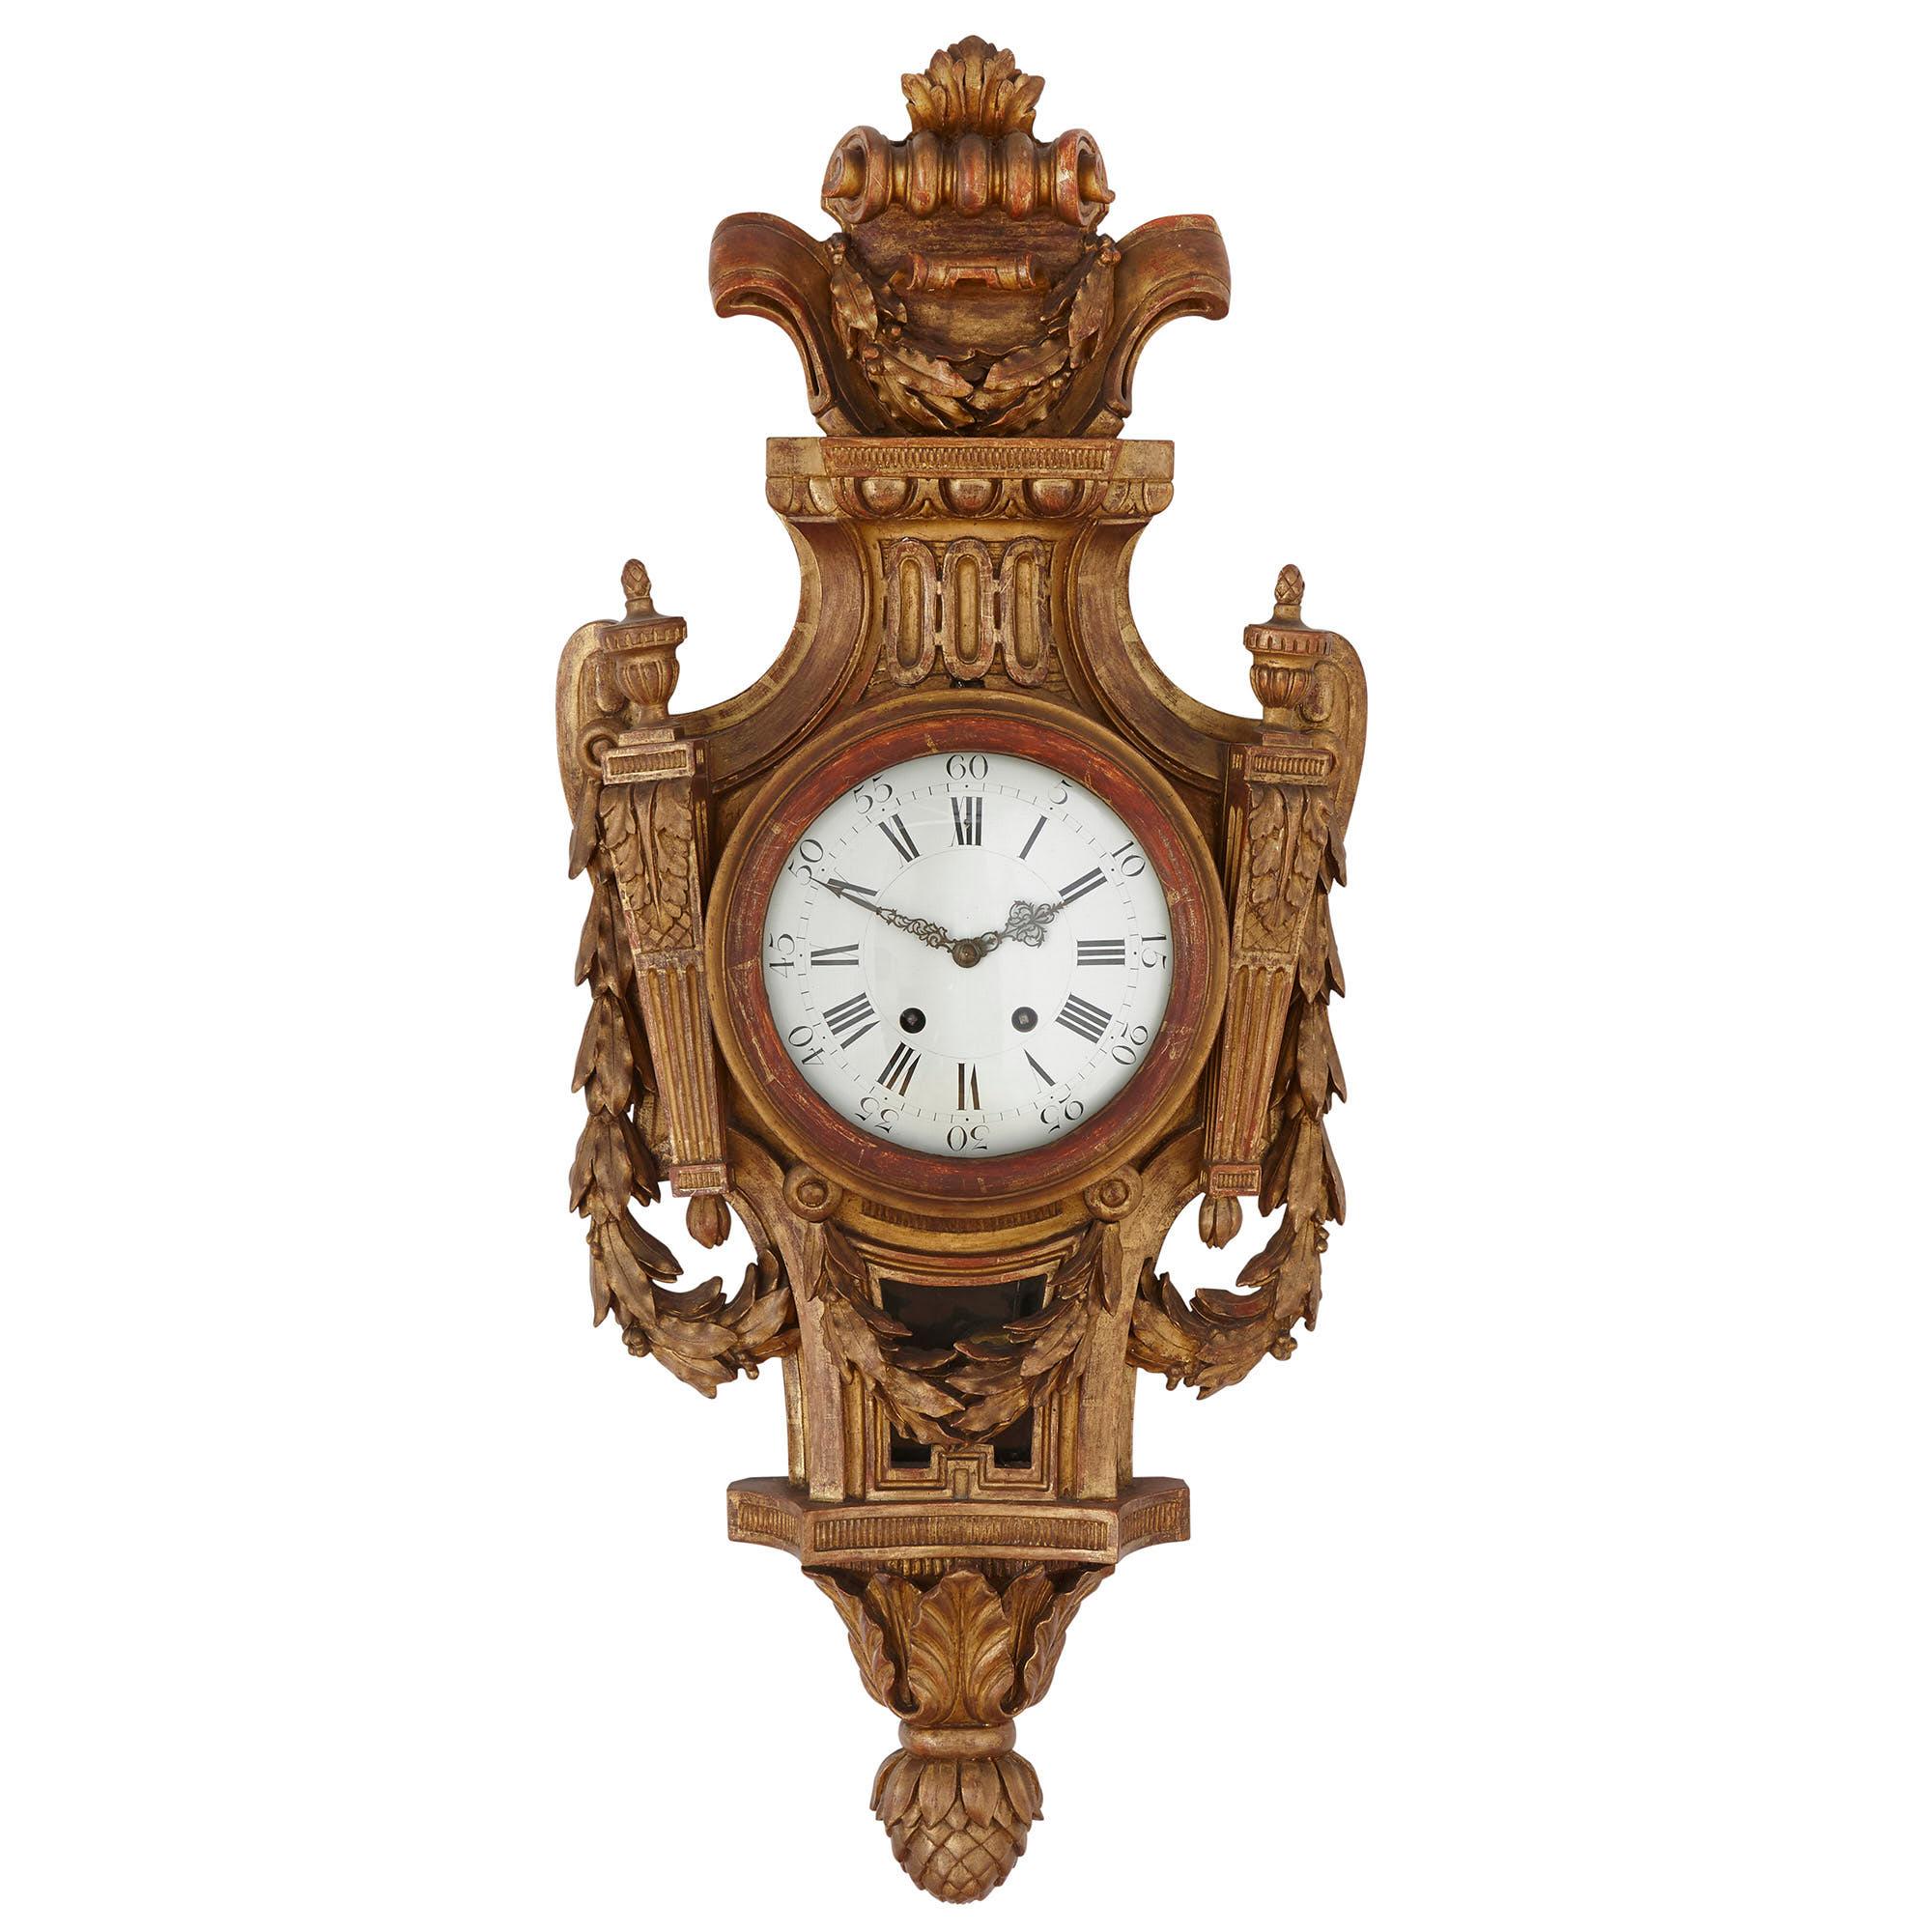 Rare neoclassical style French giltwood clock and barometer set
French, 19th century
Measures: Height 90cm, width 38cm, depth 12cm

This duo comprises a wall clock and barometer, both of which are crafted from giltwood in the Louis XVI style.